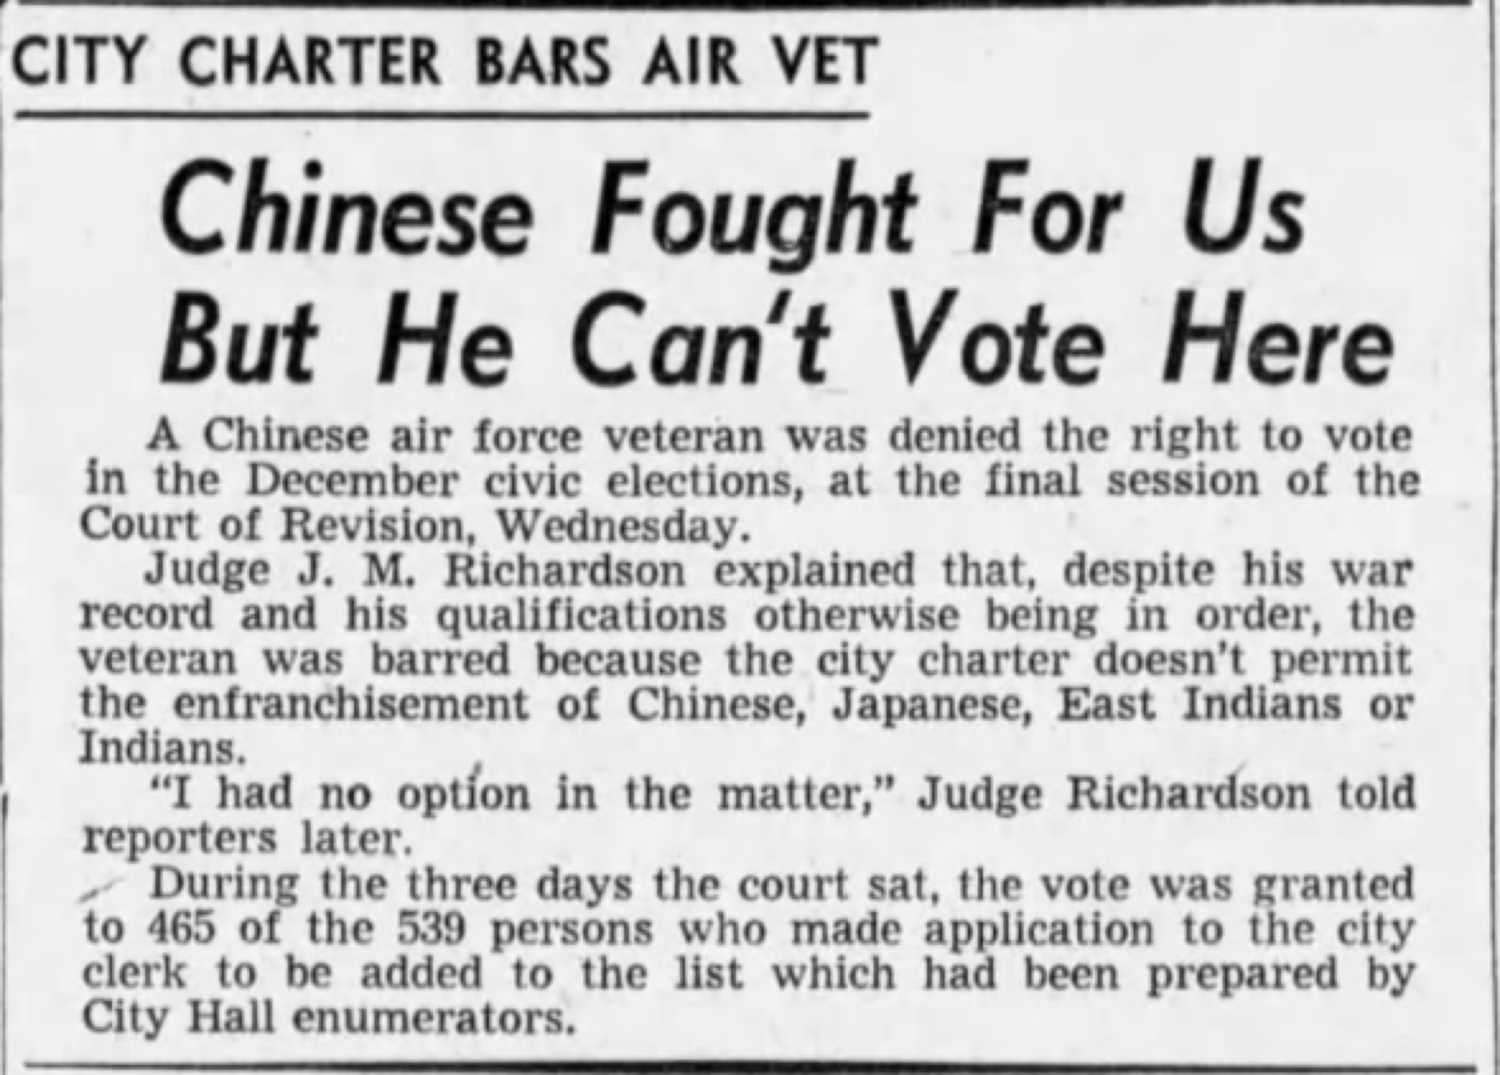 Article: “Chinese fought for us but he can’t vote here”